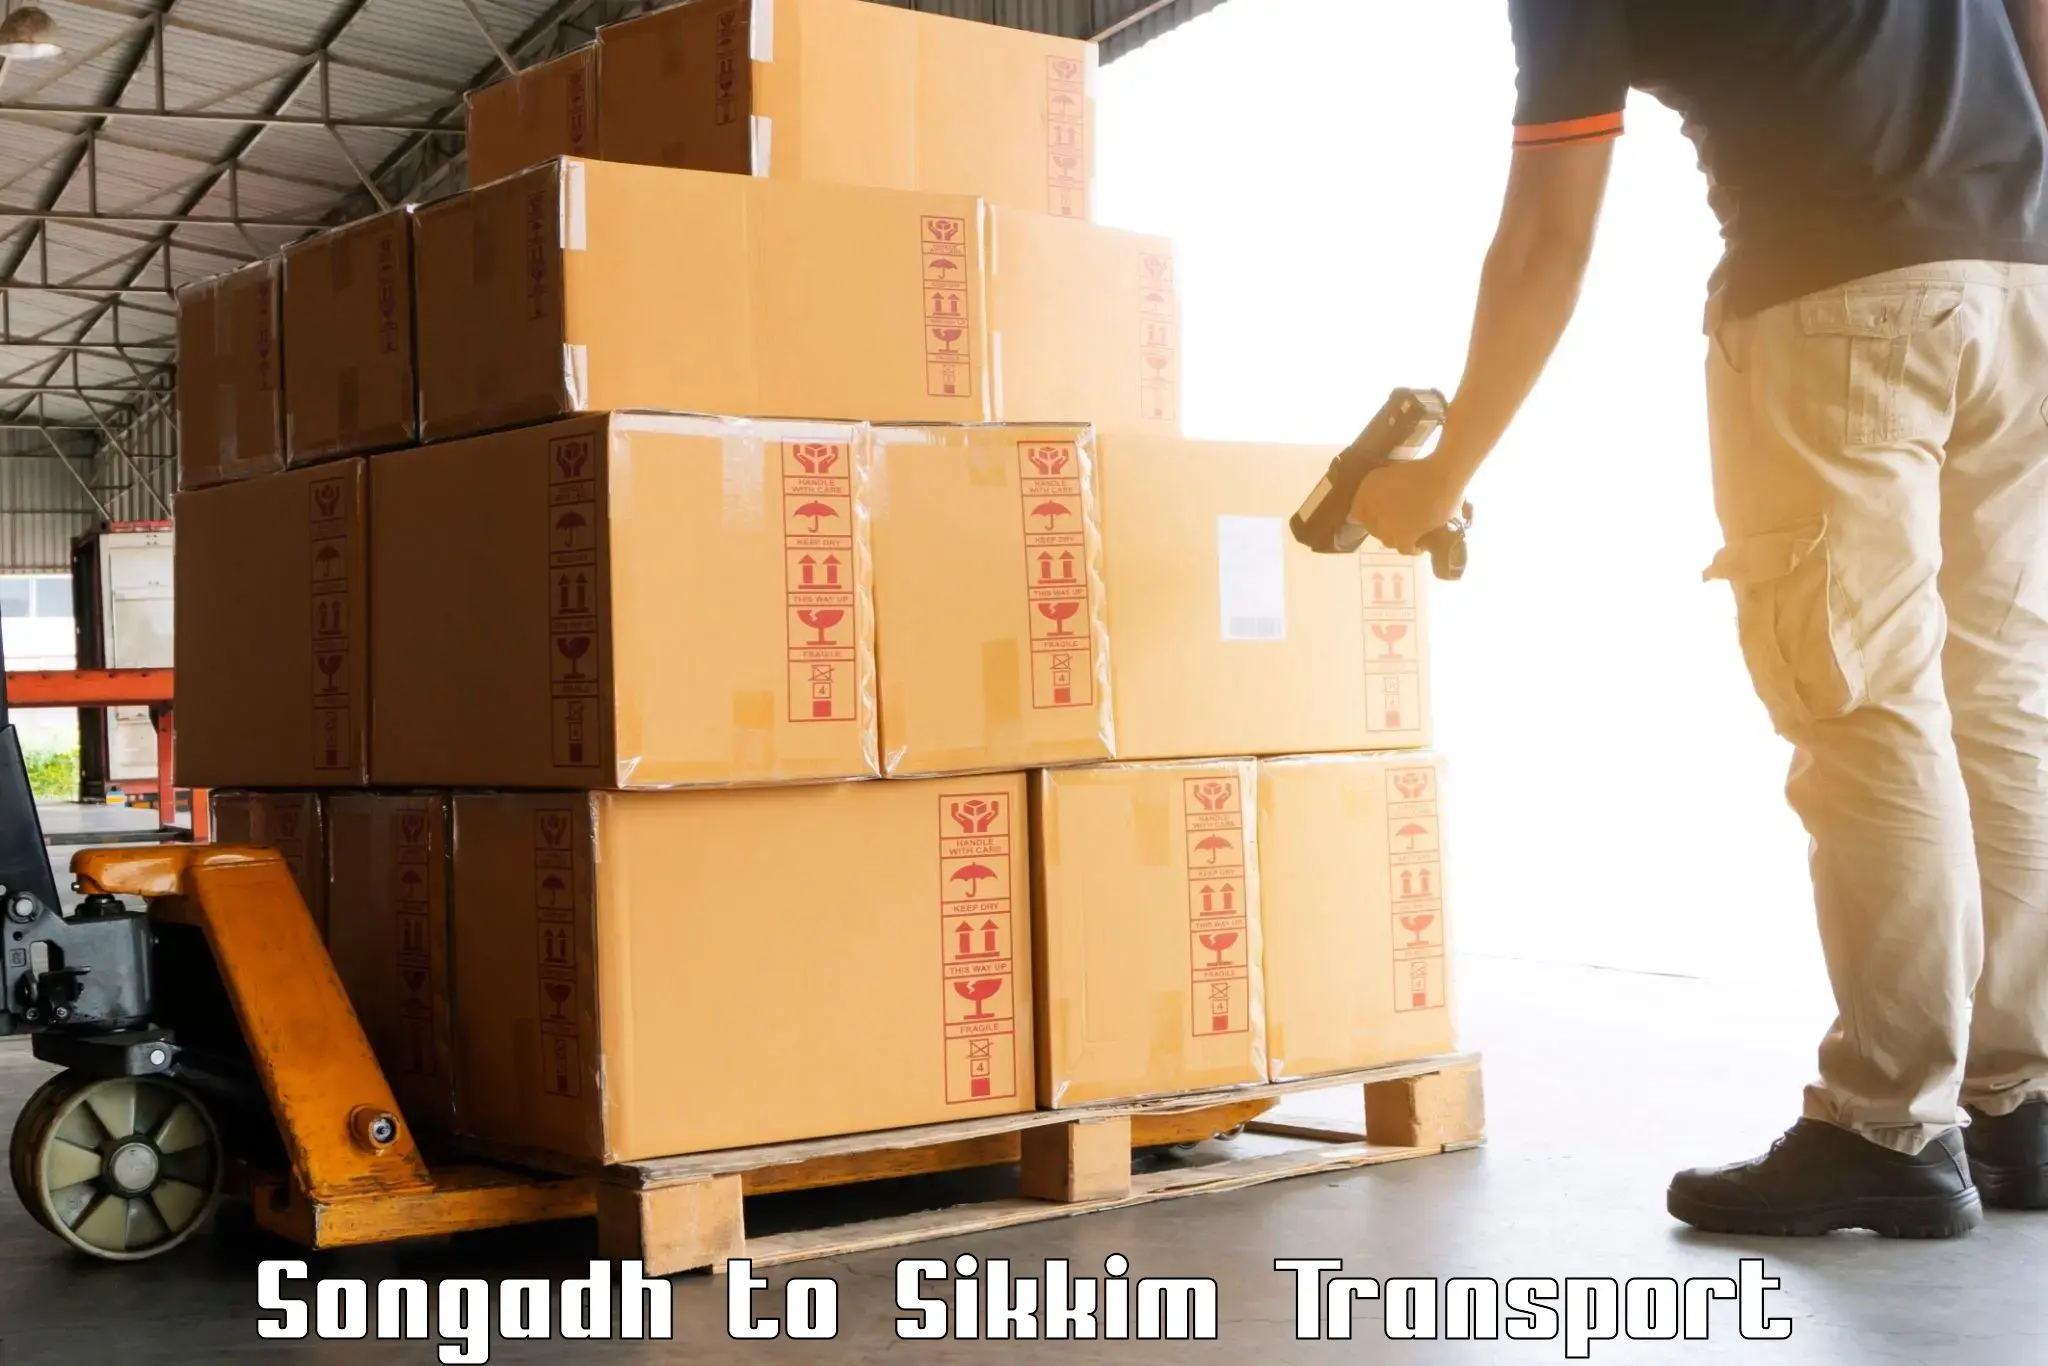 Daily parcel service transport Songadh to Namchi